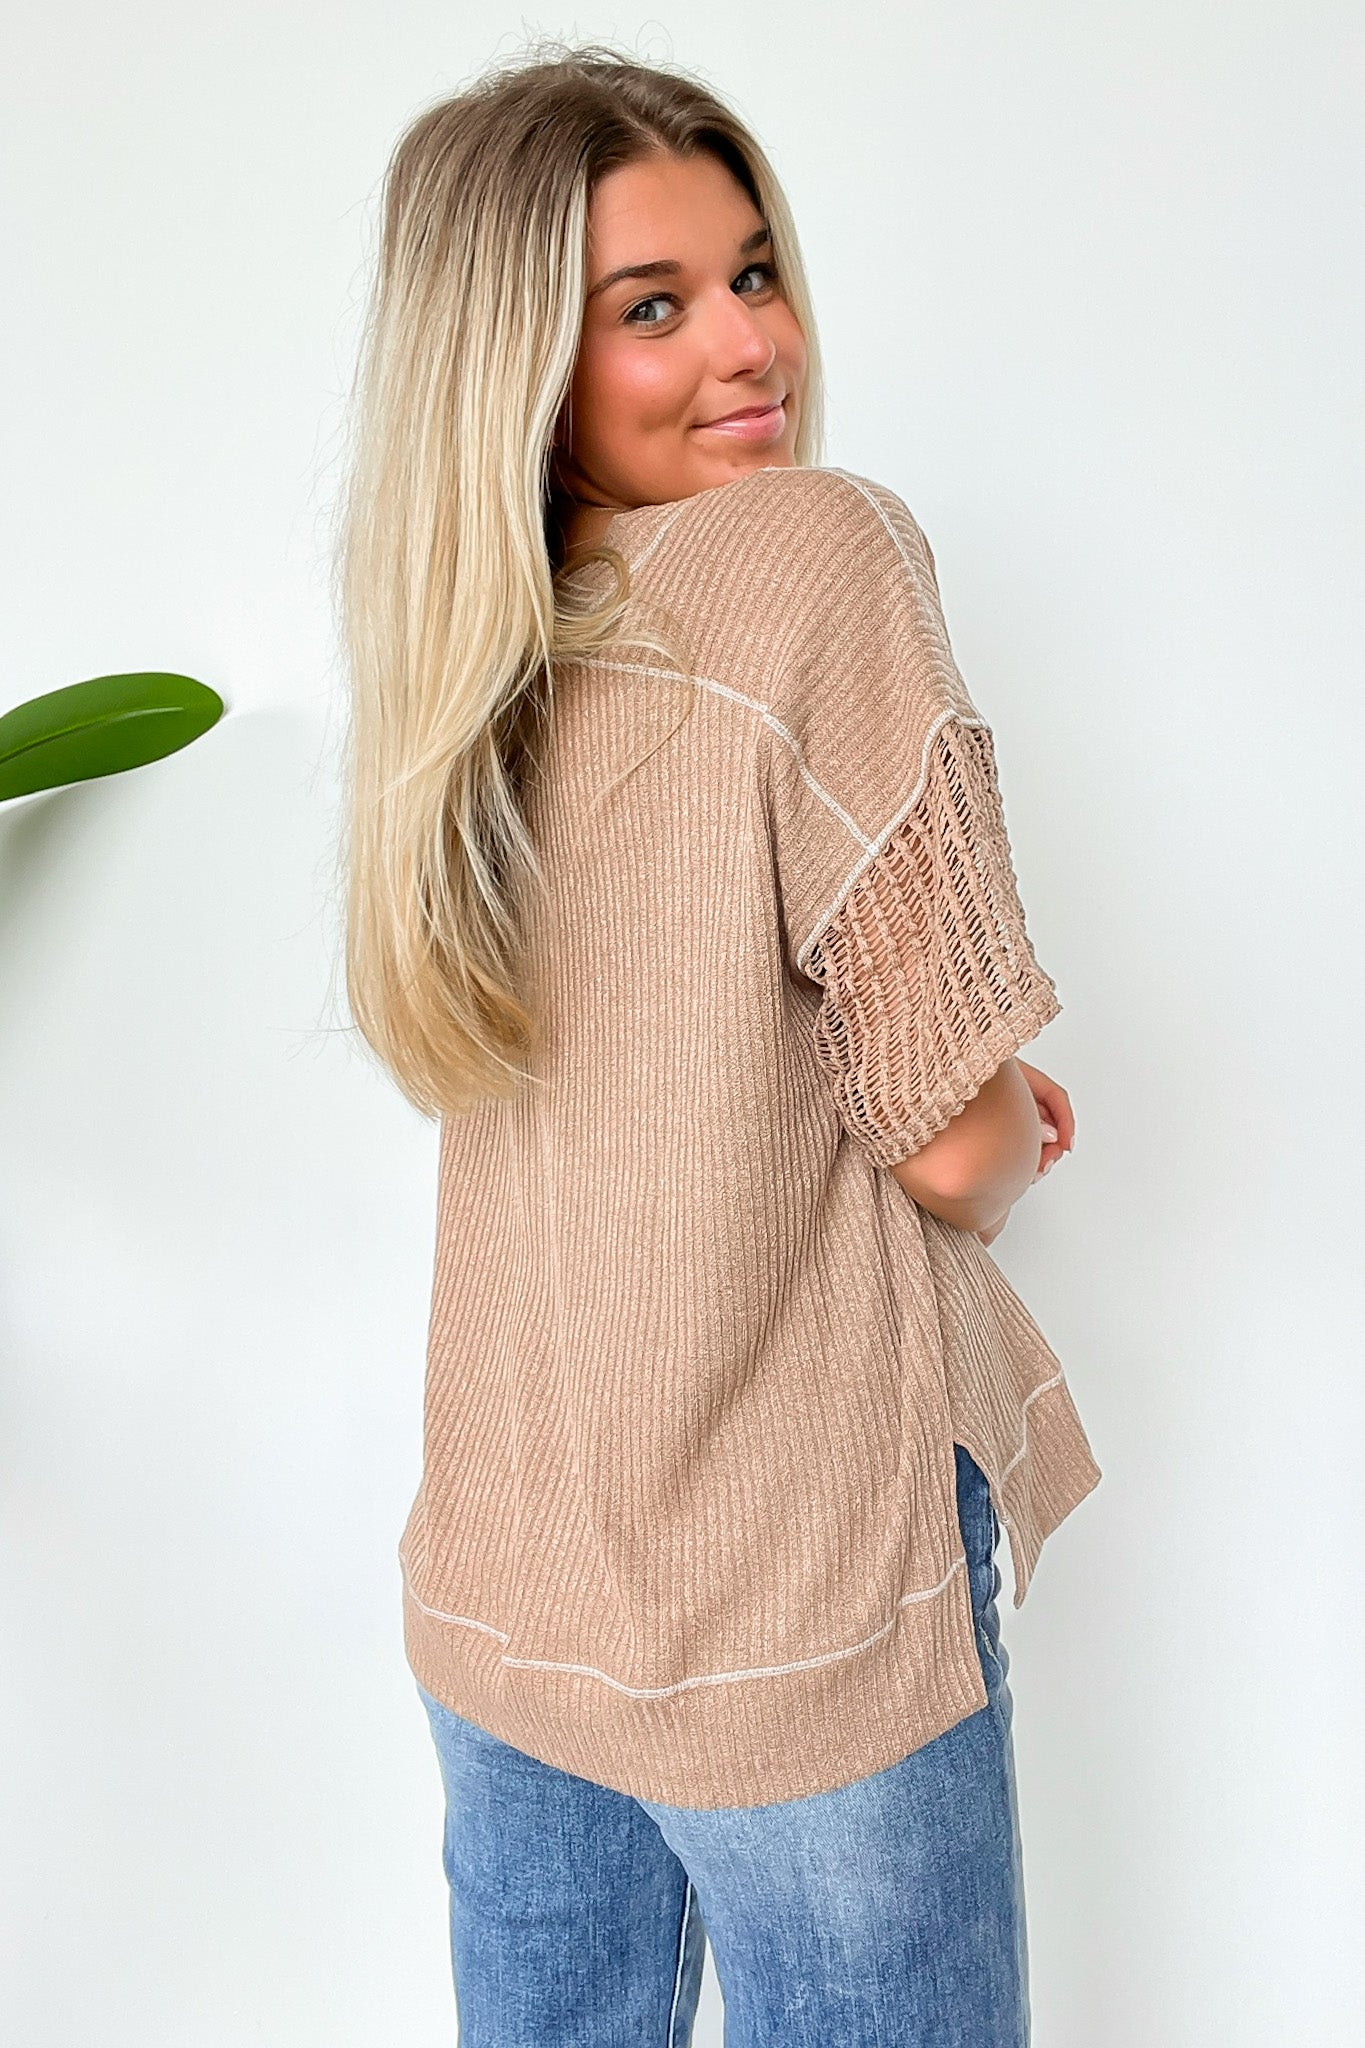  Taravella Crochet Contrast Binding Top - BACK IN STOCK - Madison and Mallory